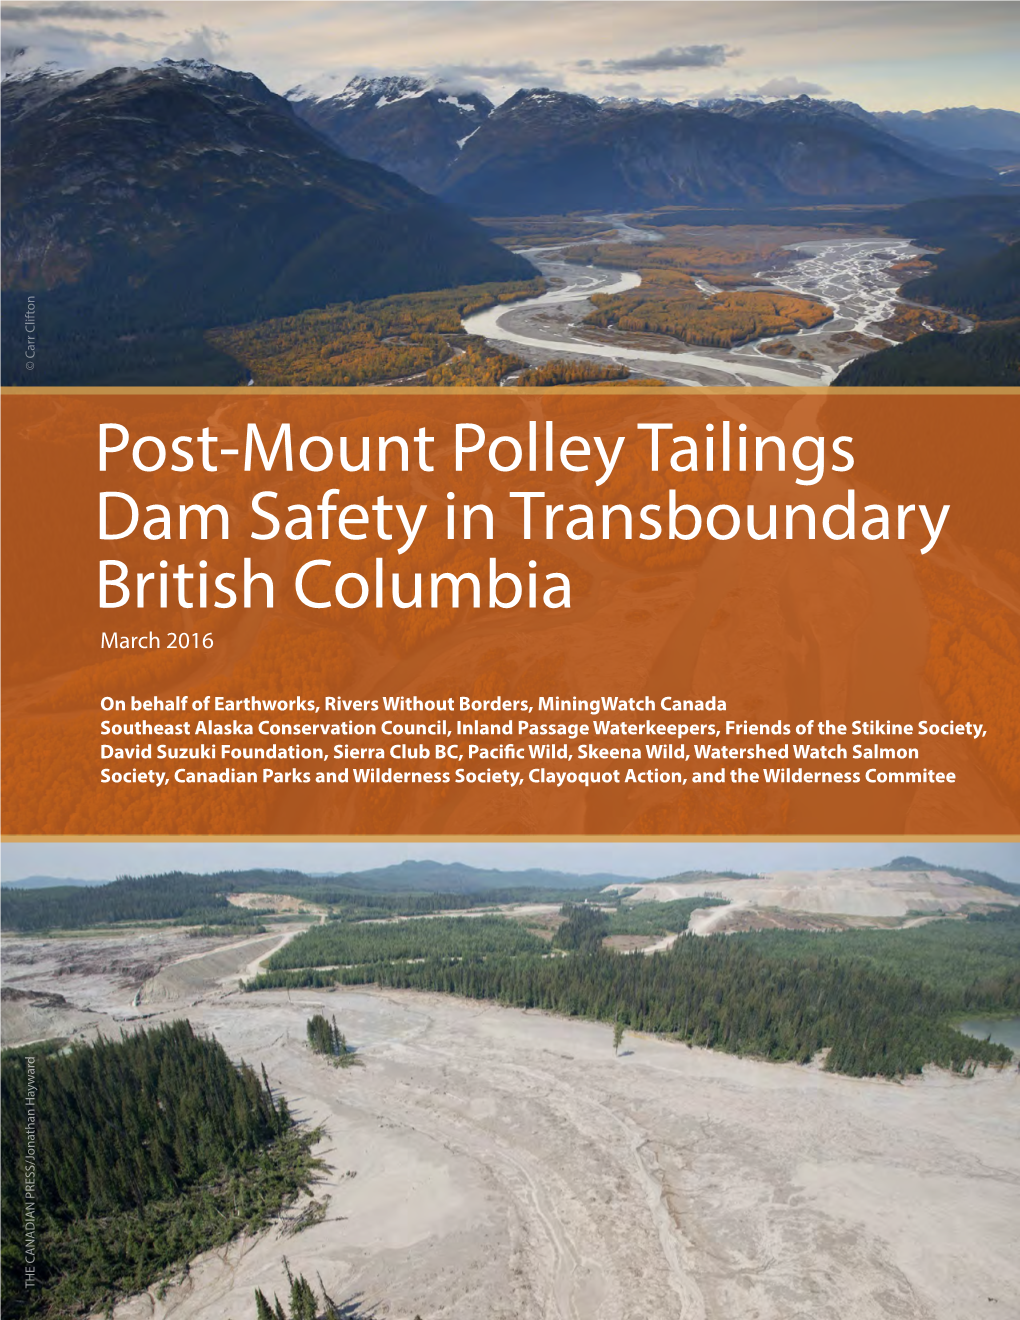 Post-Mount Polley Tailings Dam Safety in Transboundary British Columbia March 2016